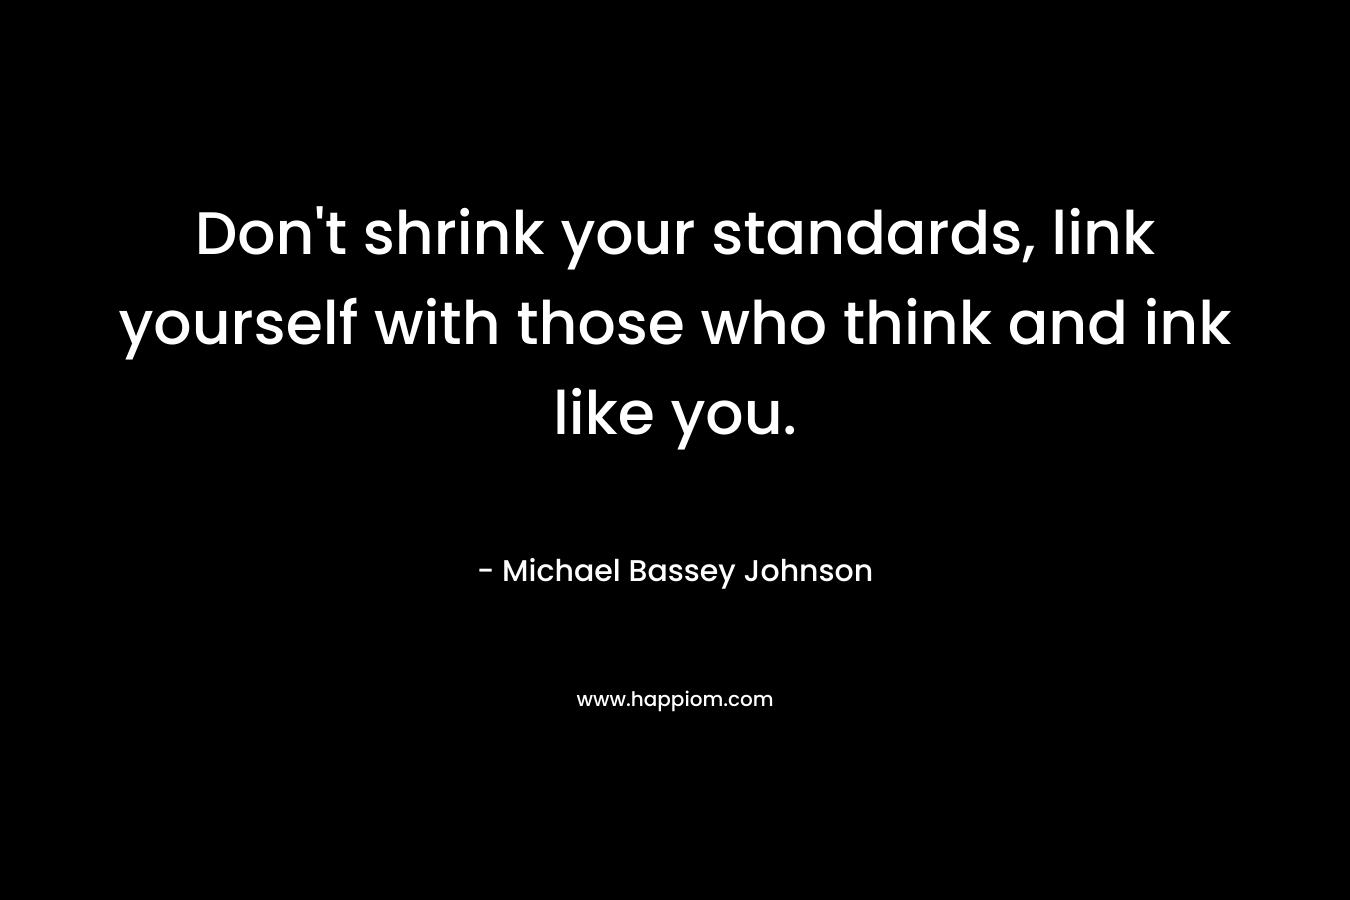 Don’t shrink your standards, link yourself with those who think and ink like you. – Michael Bassey Johnson